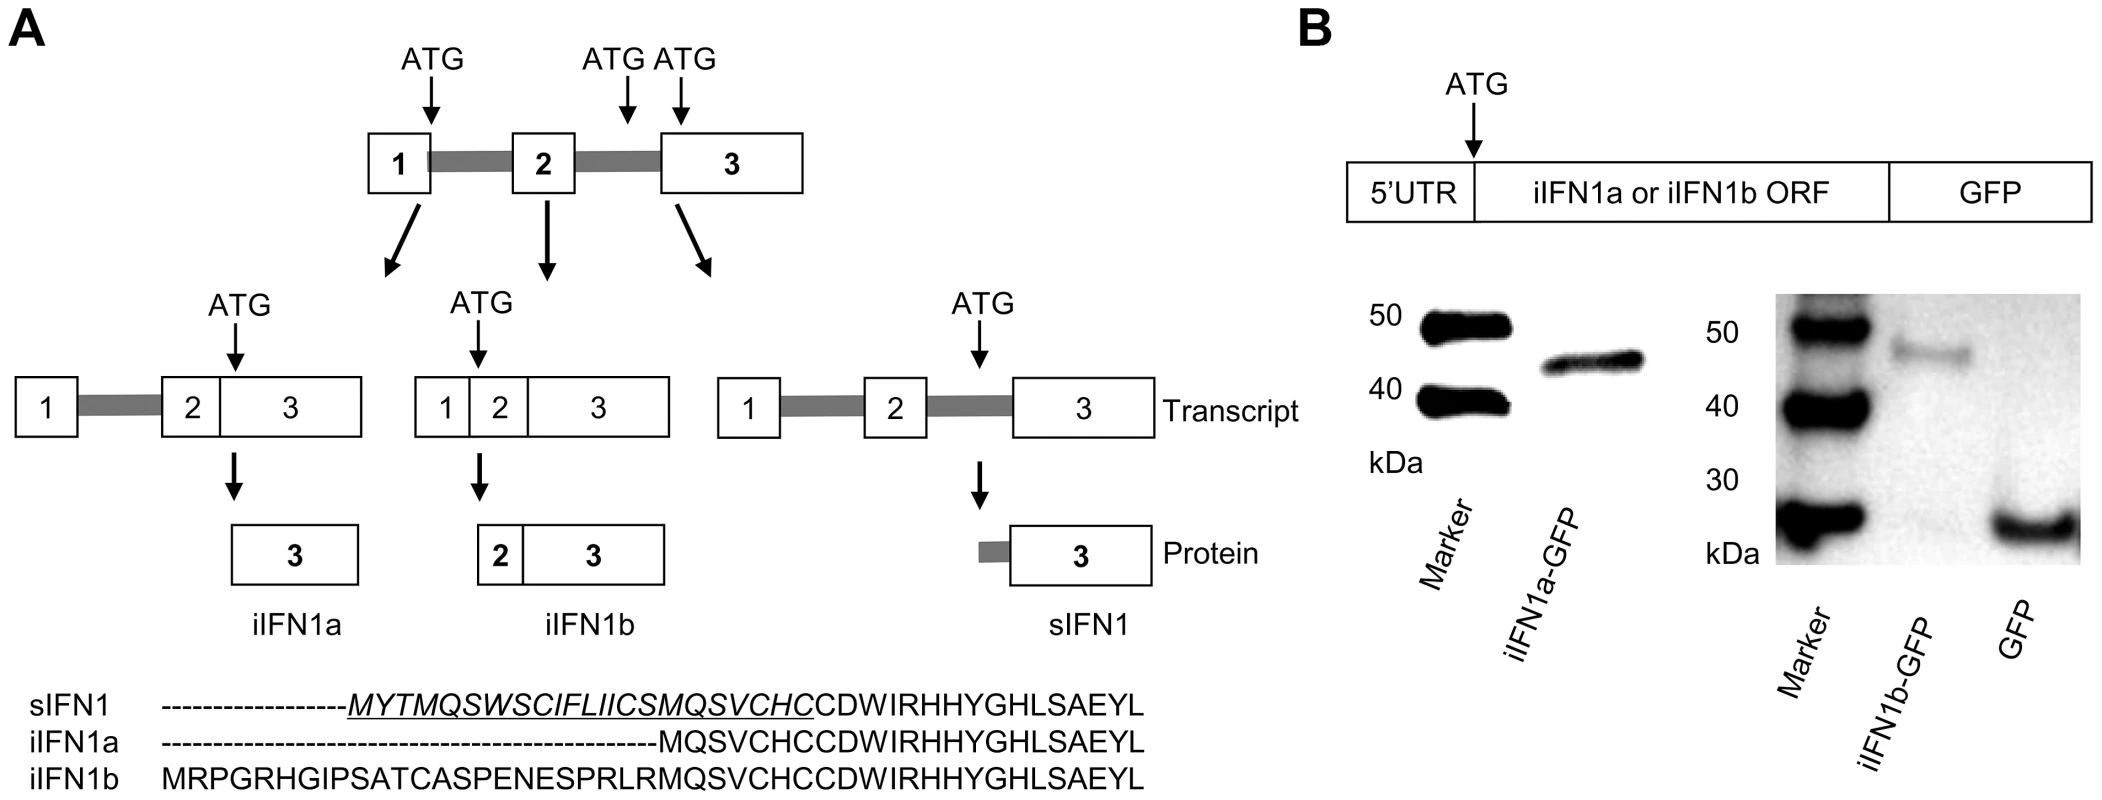 Alternative splicing of rainbow trout IFN1 mRNA leads to synthesis of intracellular proteins.